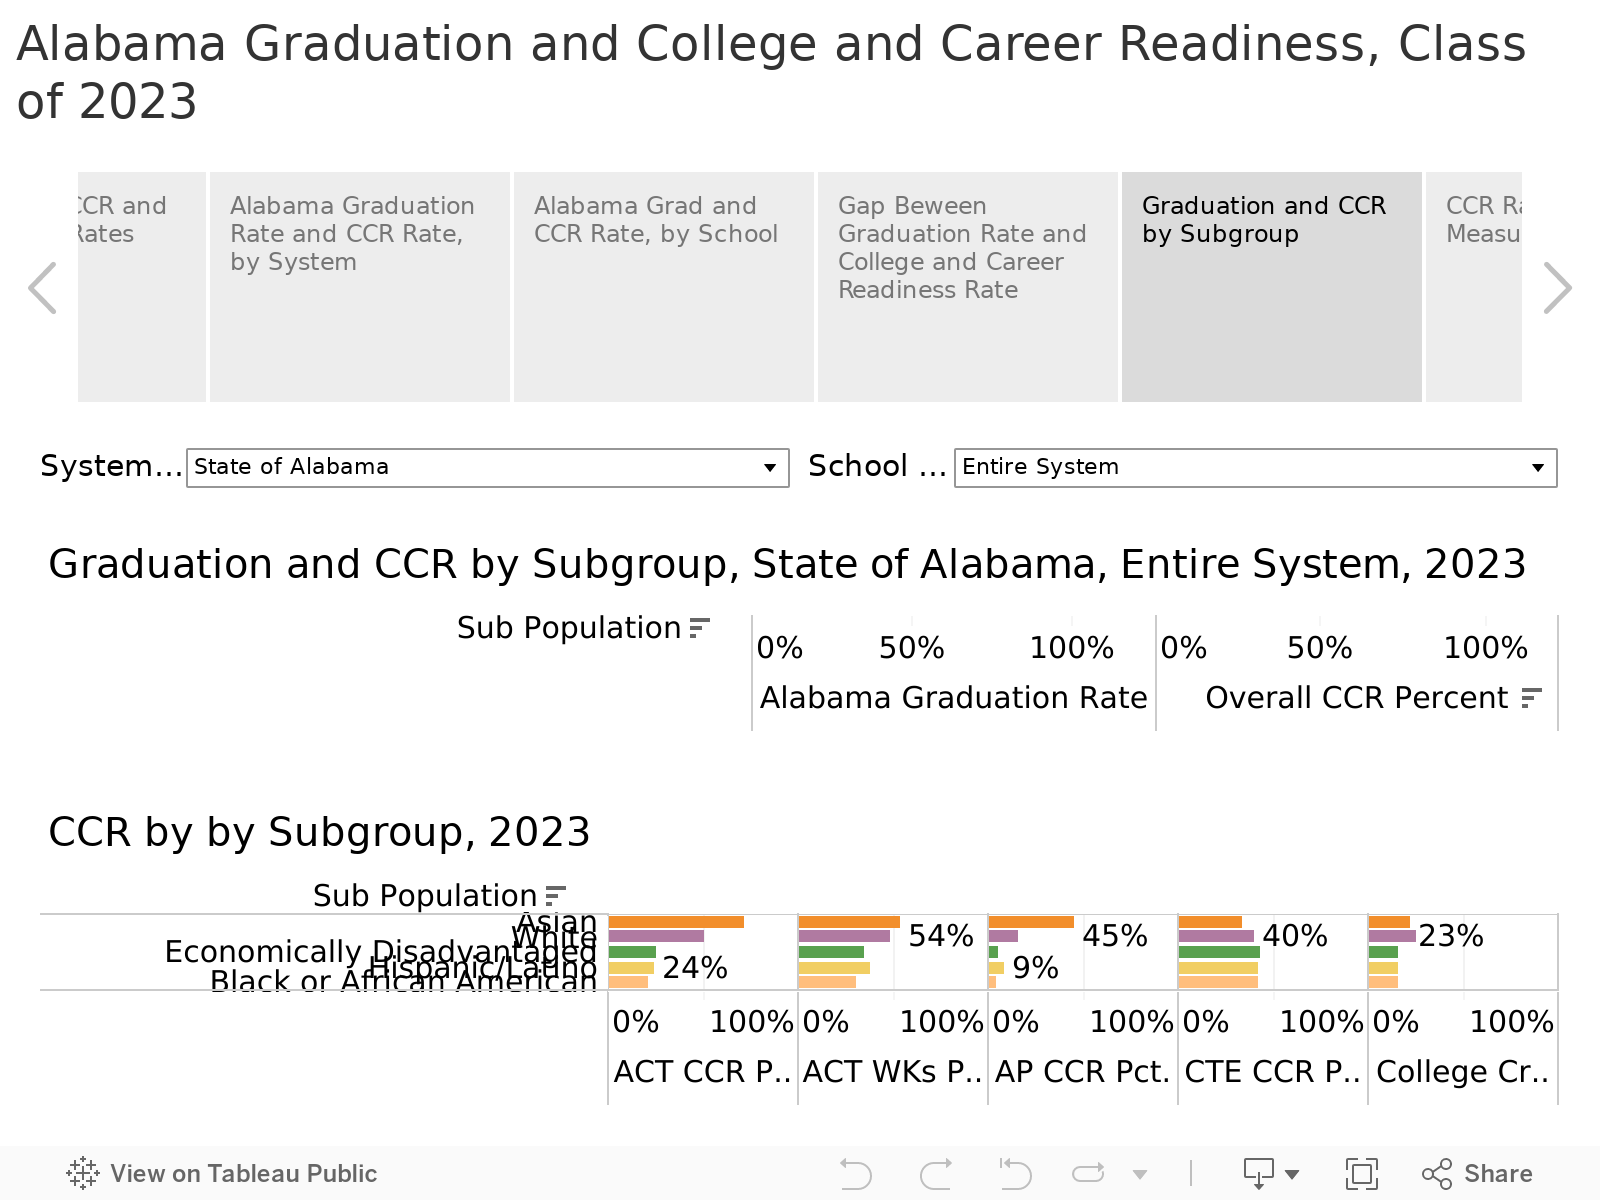 Alabama Graduation and College and Career Readiness, Class of 2023 